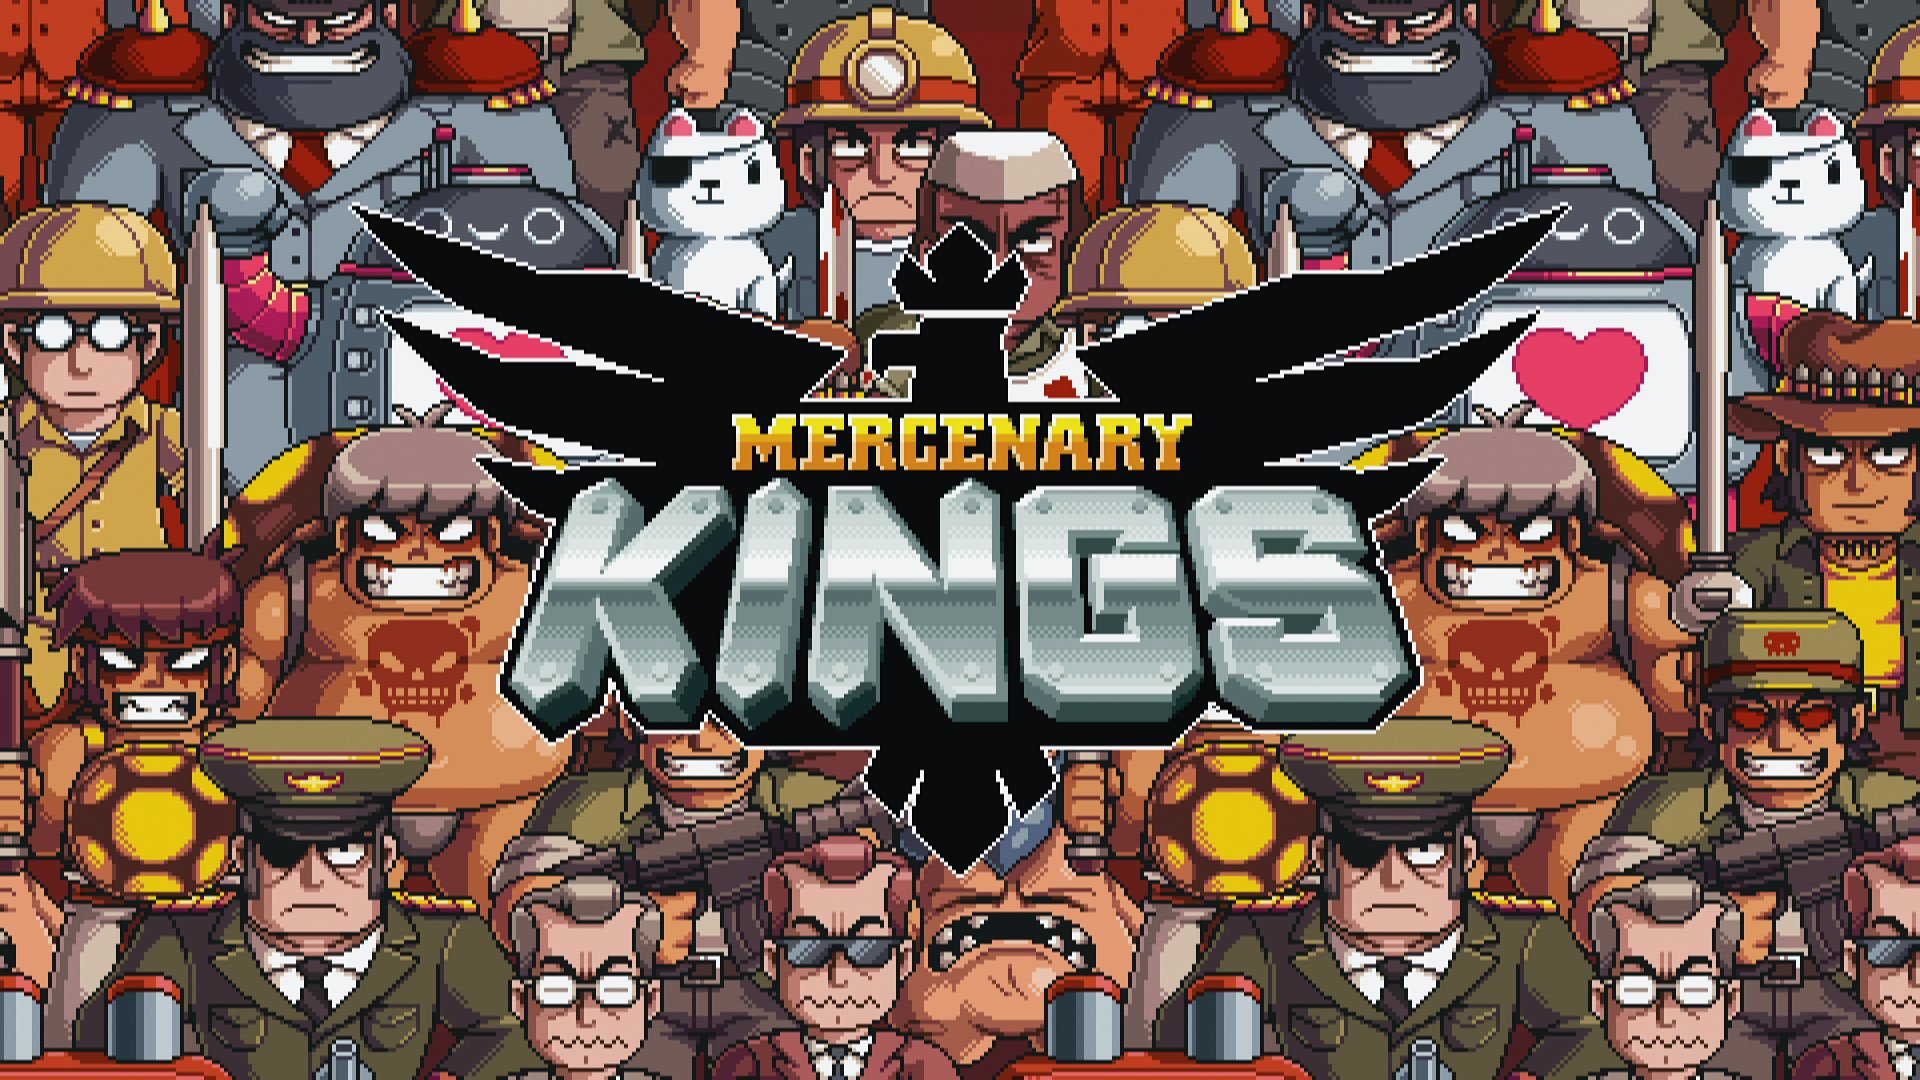 Mercenary Kings HD Wallpapers and Background Images   stmednet